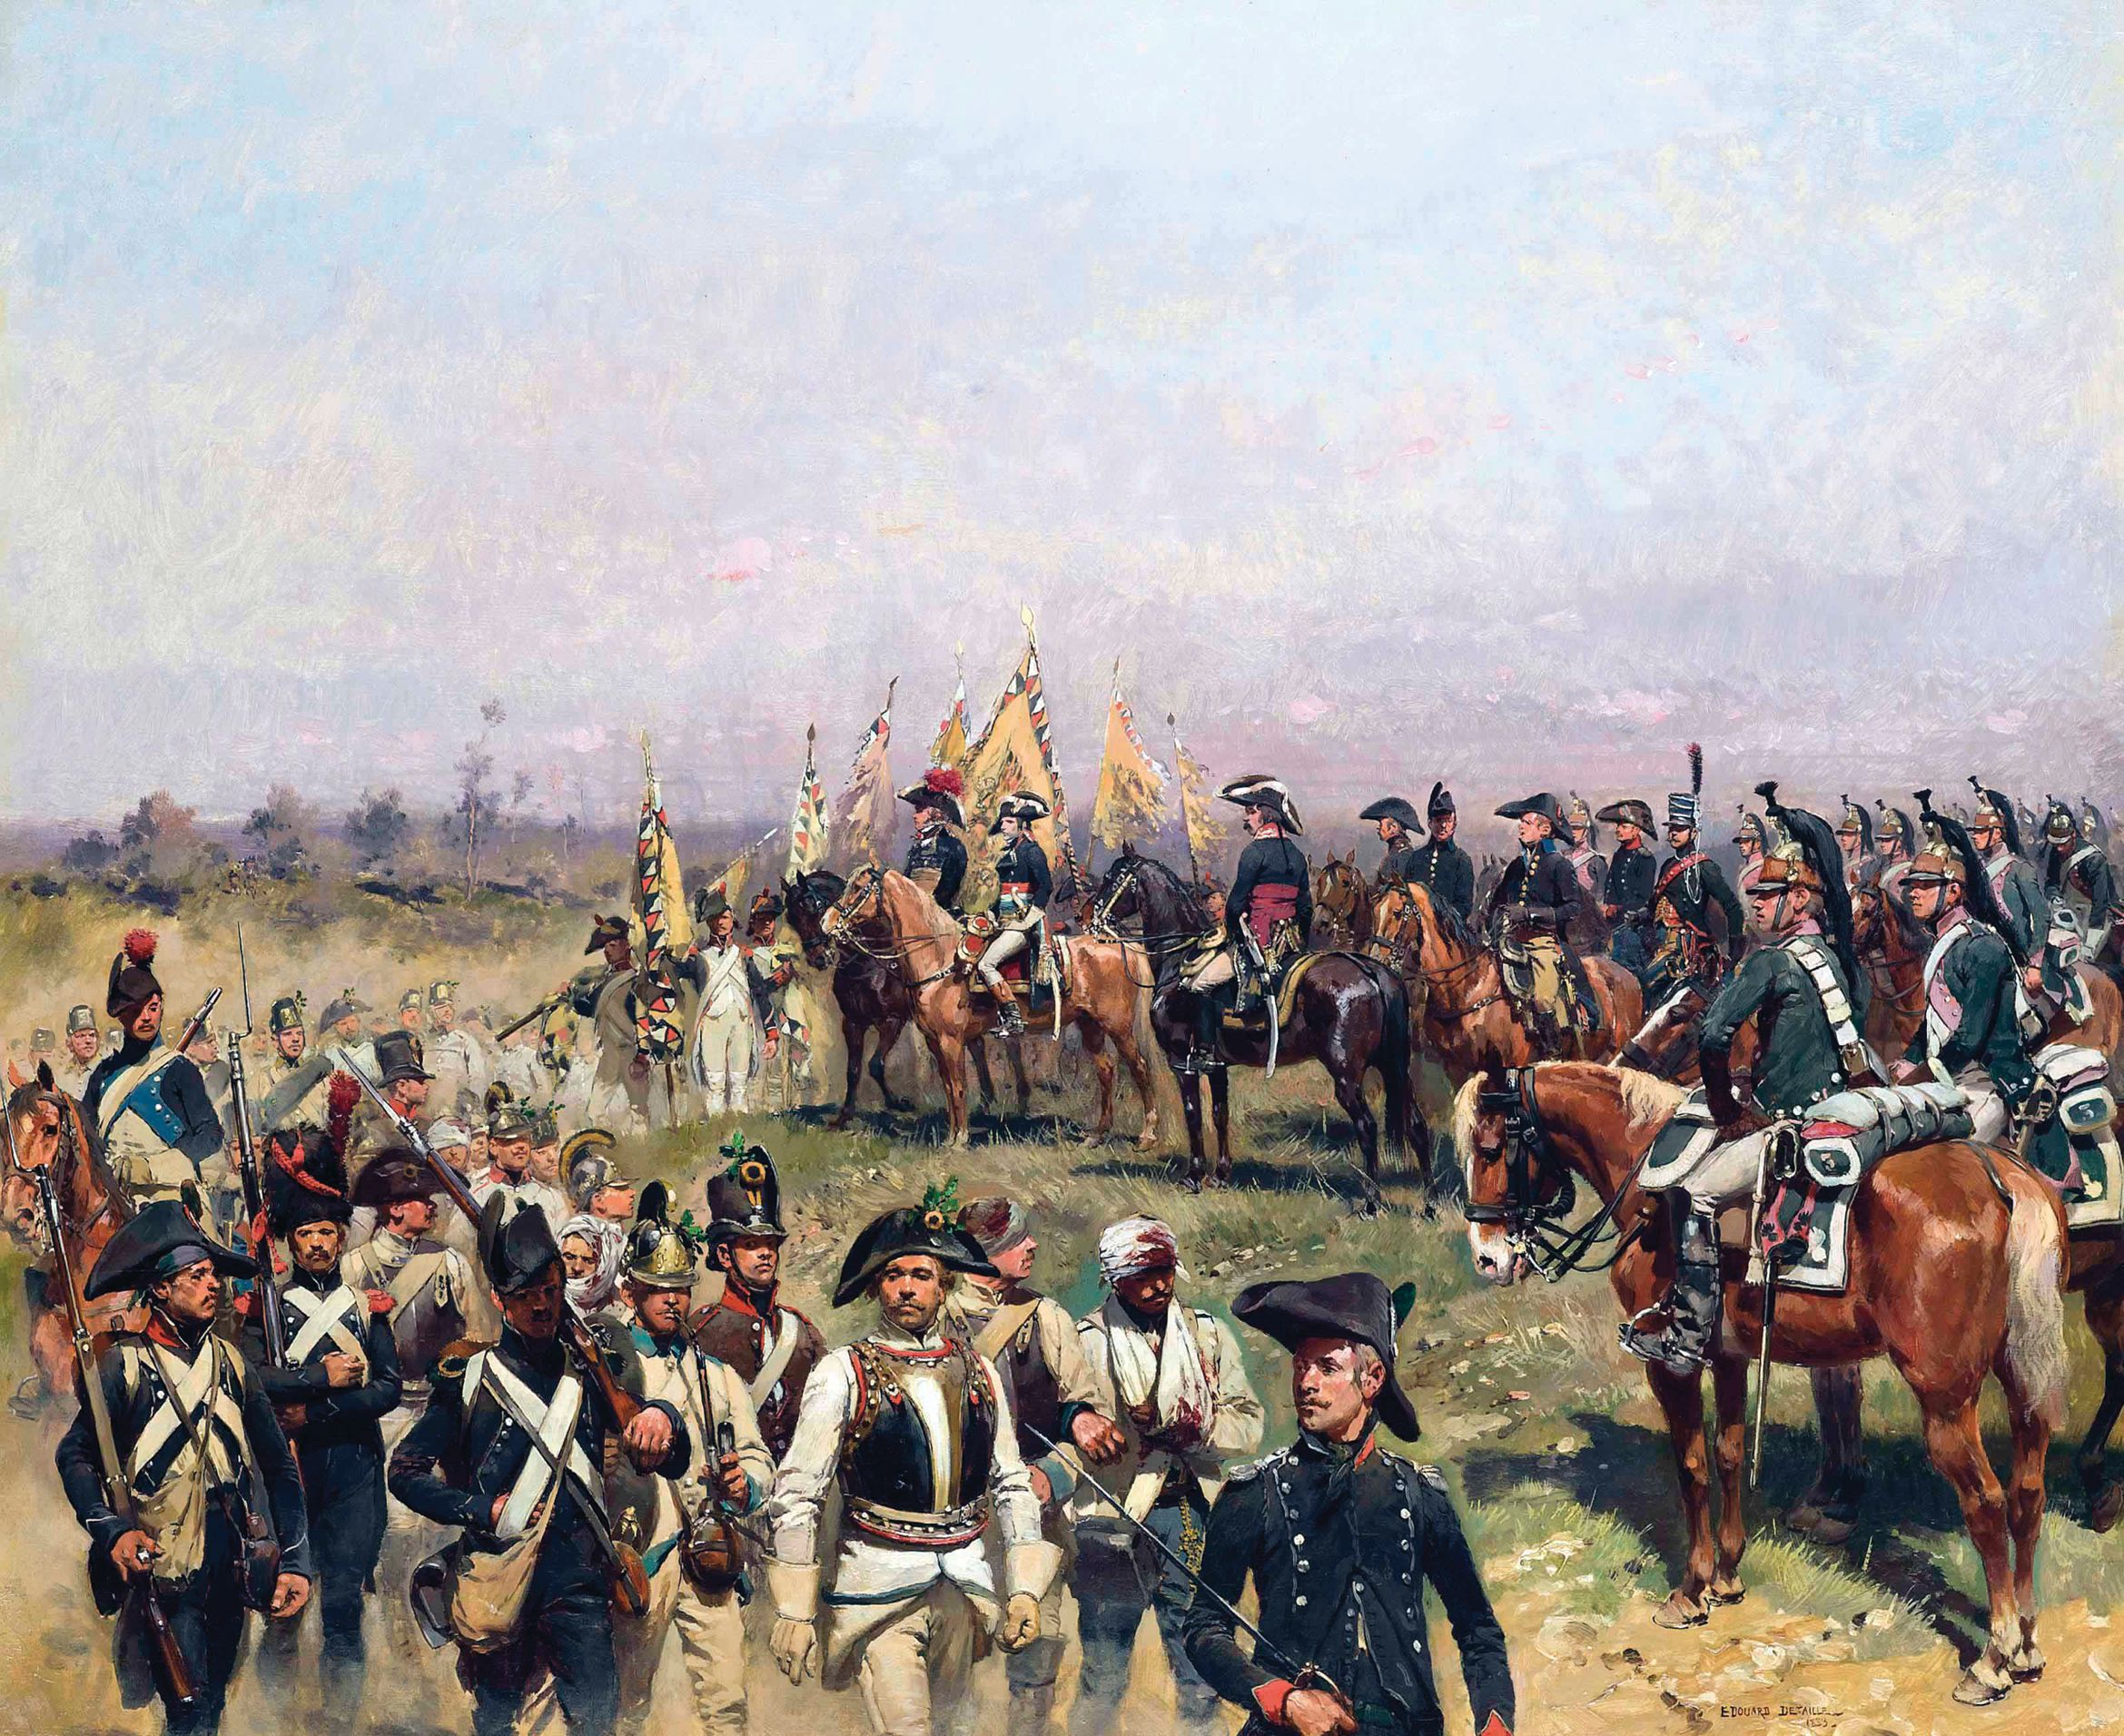 Napoleon immediately set about getting back pay and new uniforms for his troops when he assumed command of the Army of Italy.